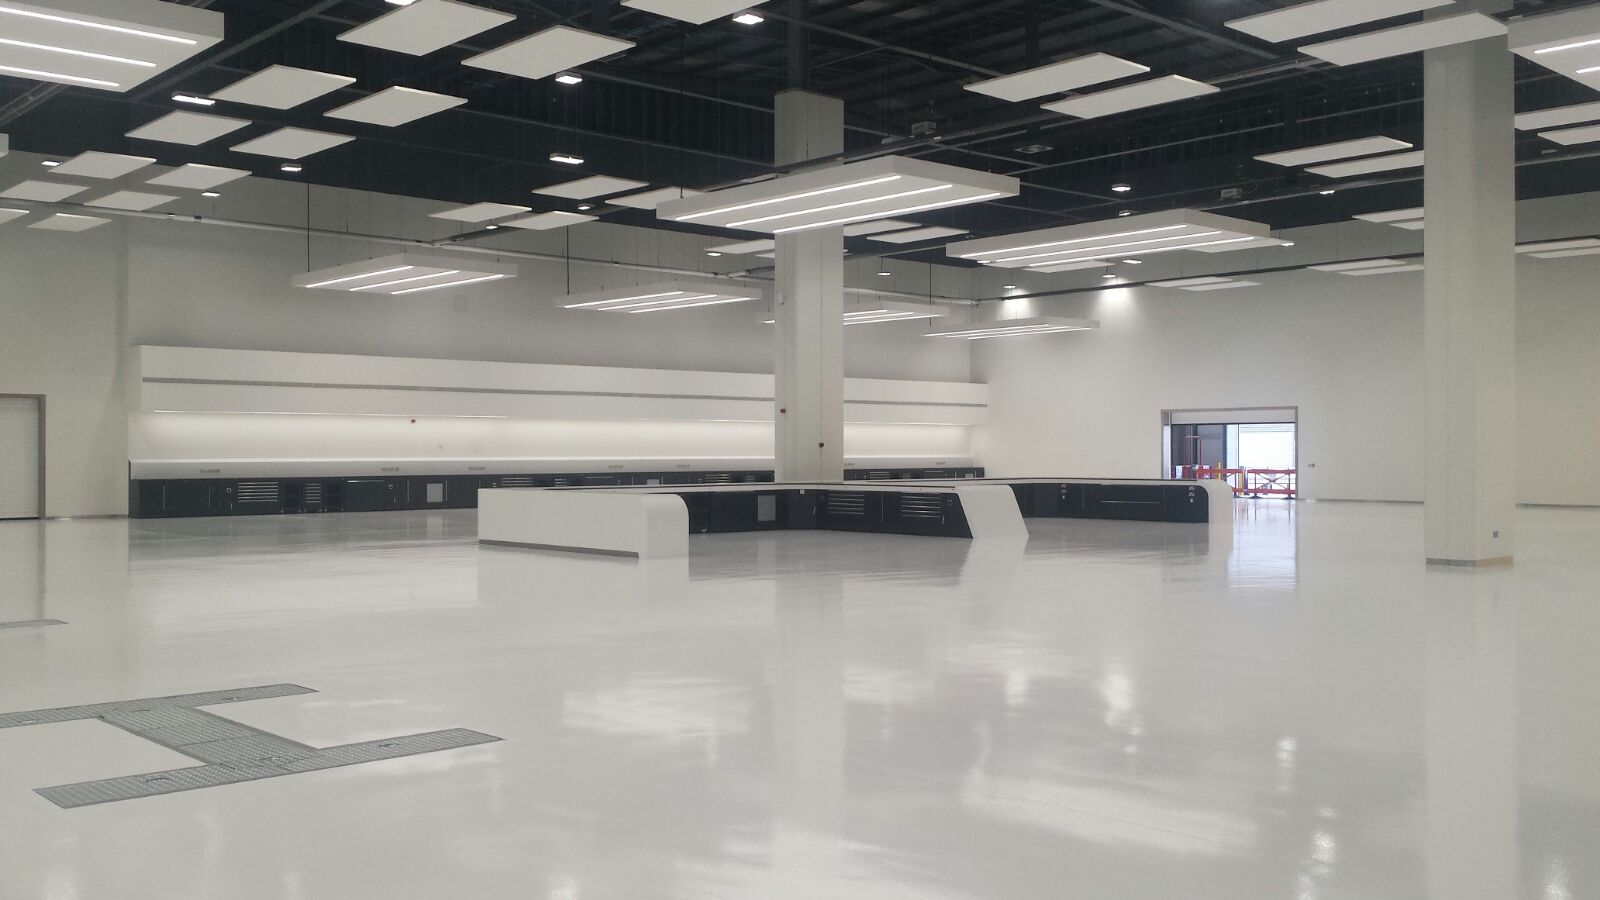  Expert Advice for Selecting a Superior Epoxy Floor System for Your Factory